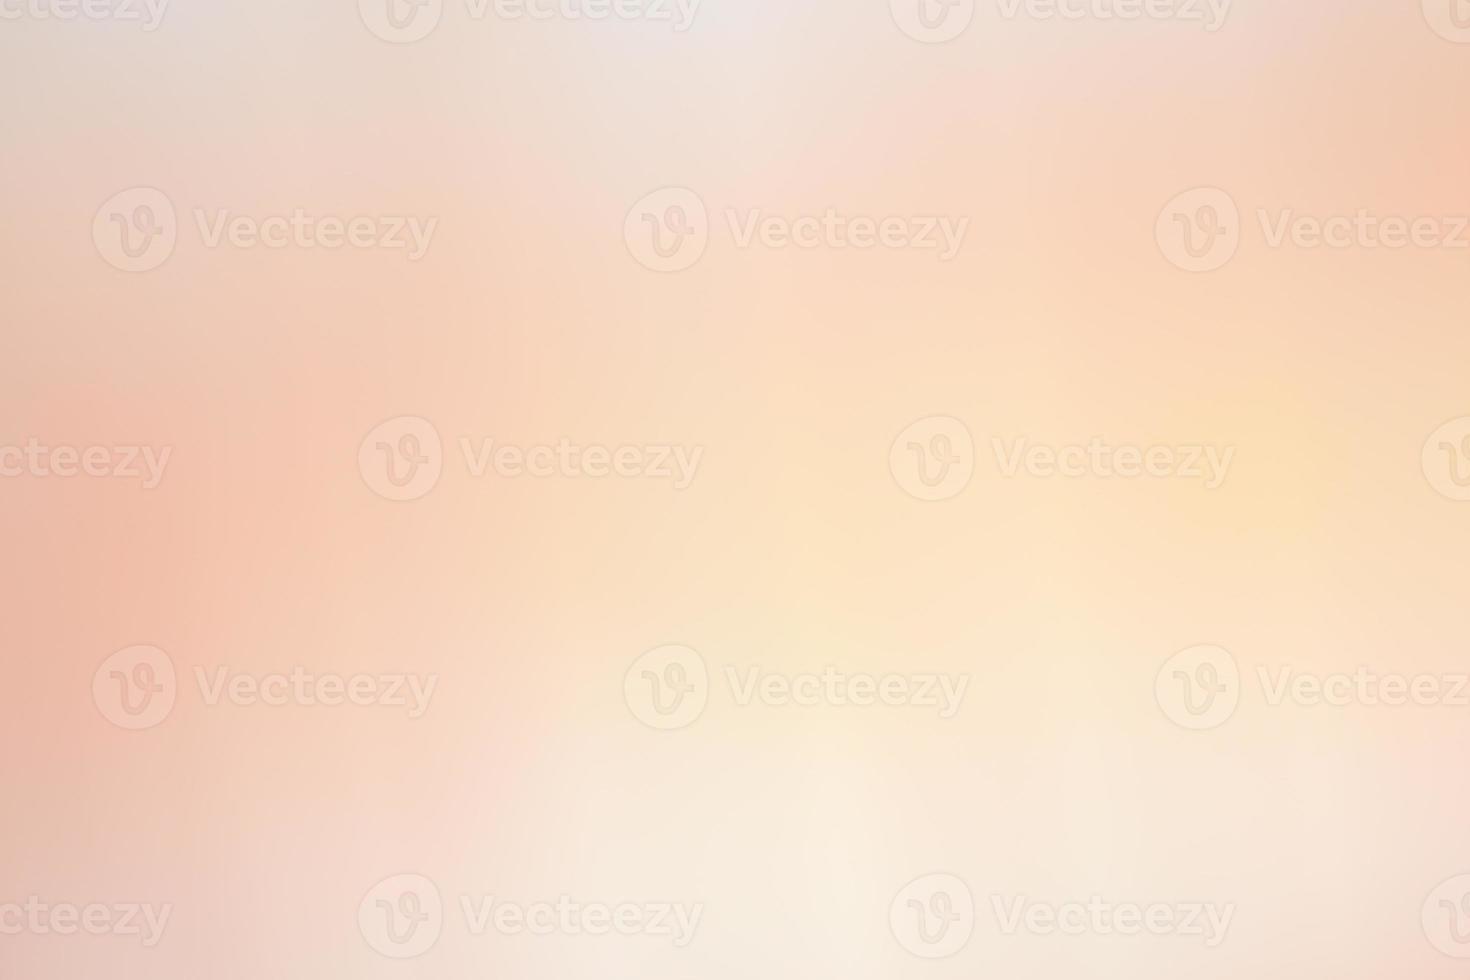 pastel sweet colorful blur background photo